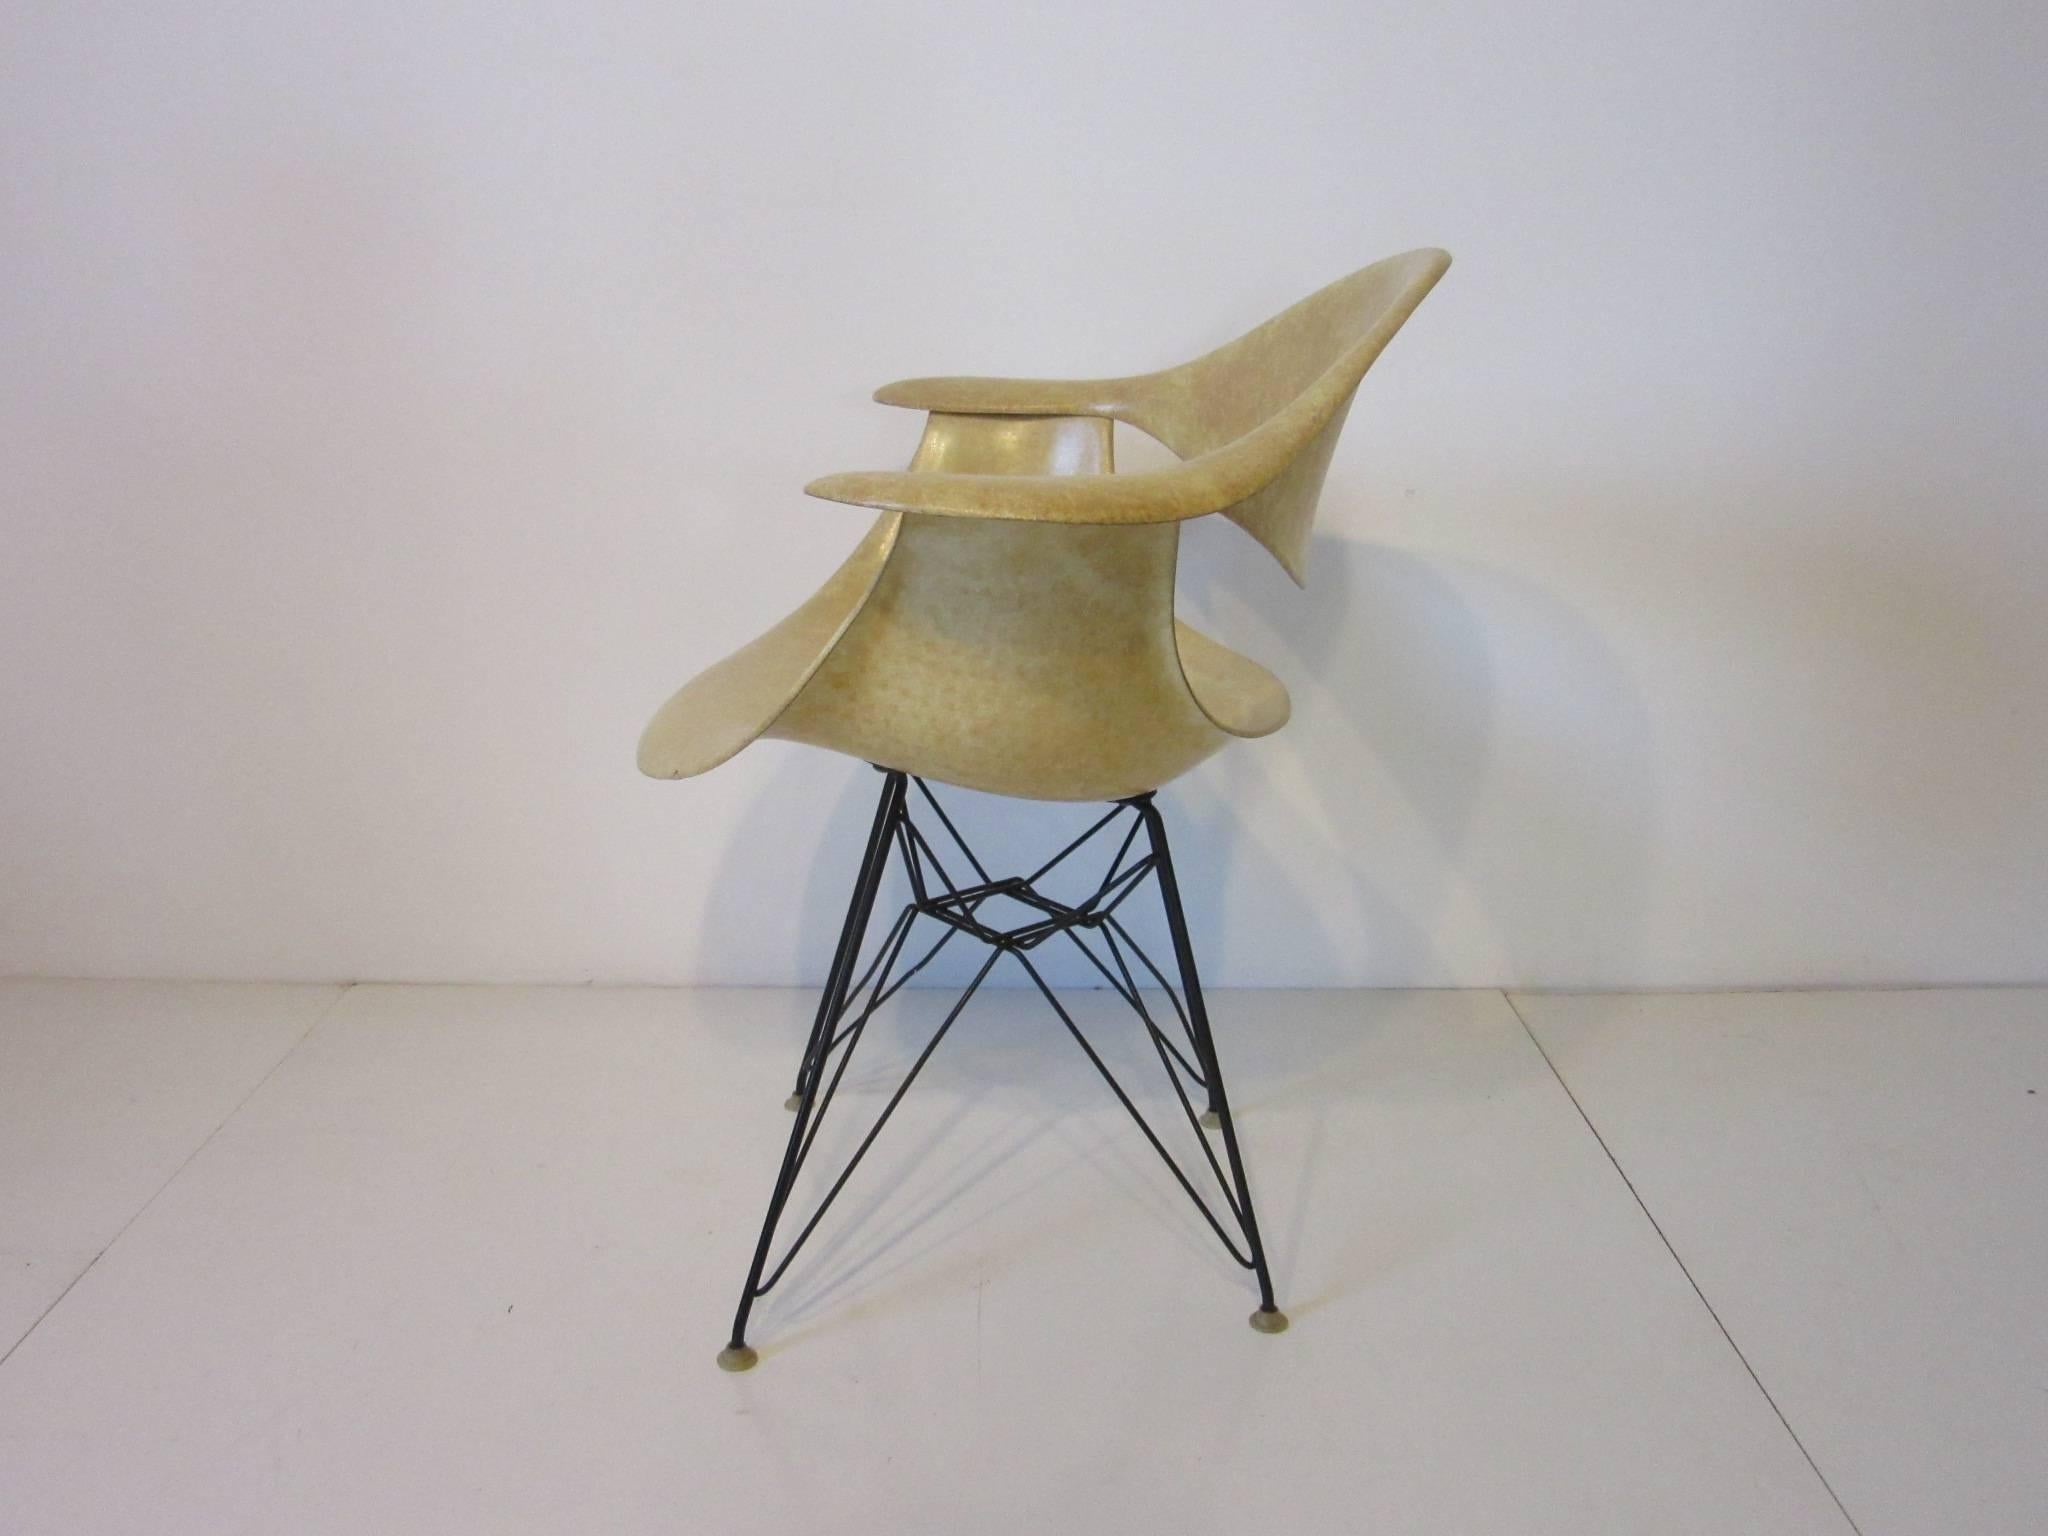 An early per production prototype fiberglass arm shell or DAF chair designed by George Nelson. This chair came directly from a engineer working for the Herman Miller company in Zeeland Michigan purchased by a collector of important midcentury